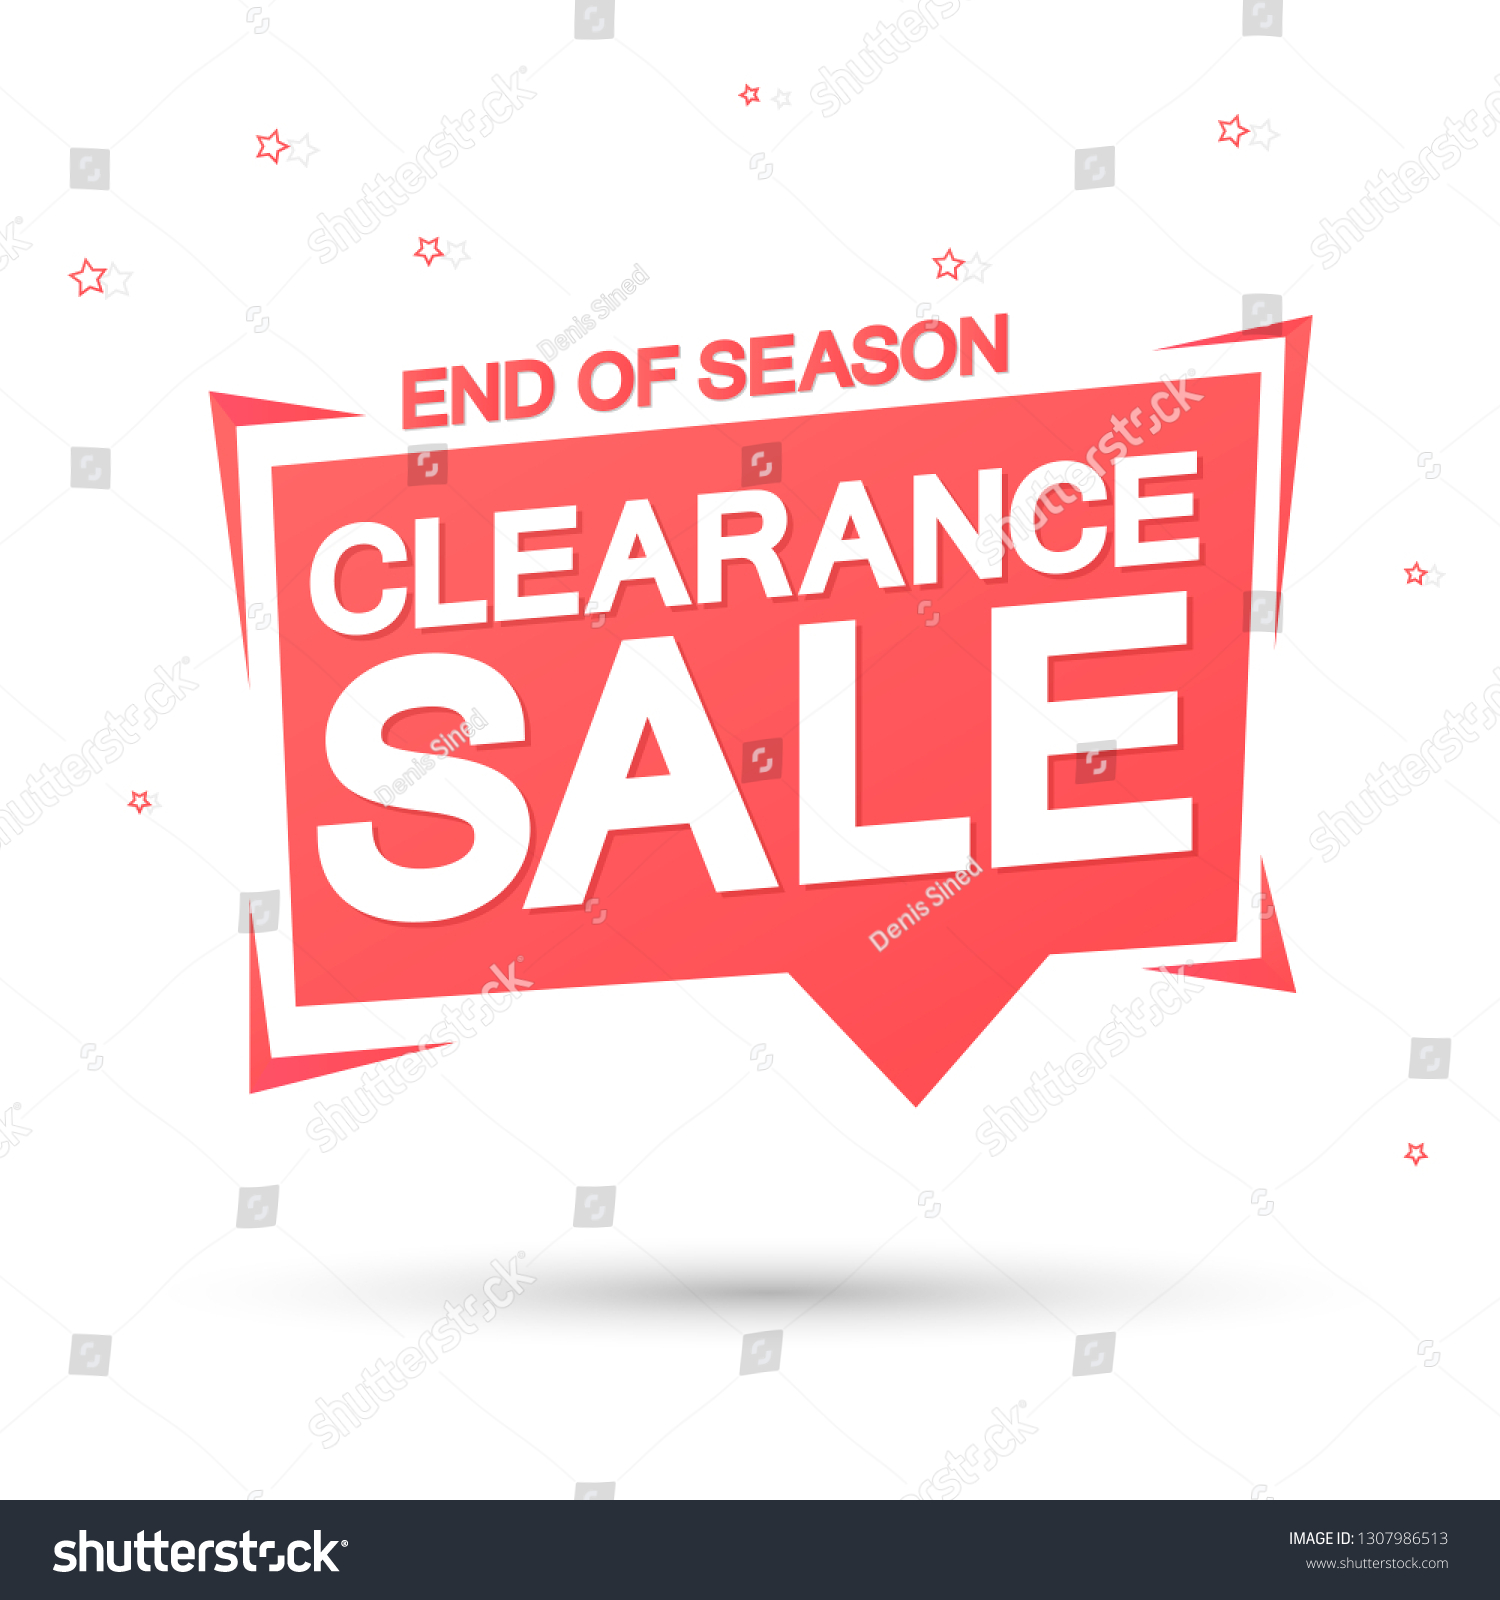 Clearance Sale Tag Design Template Discount Stock Vector Royalty Free 1307986513